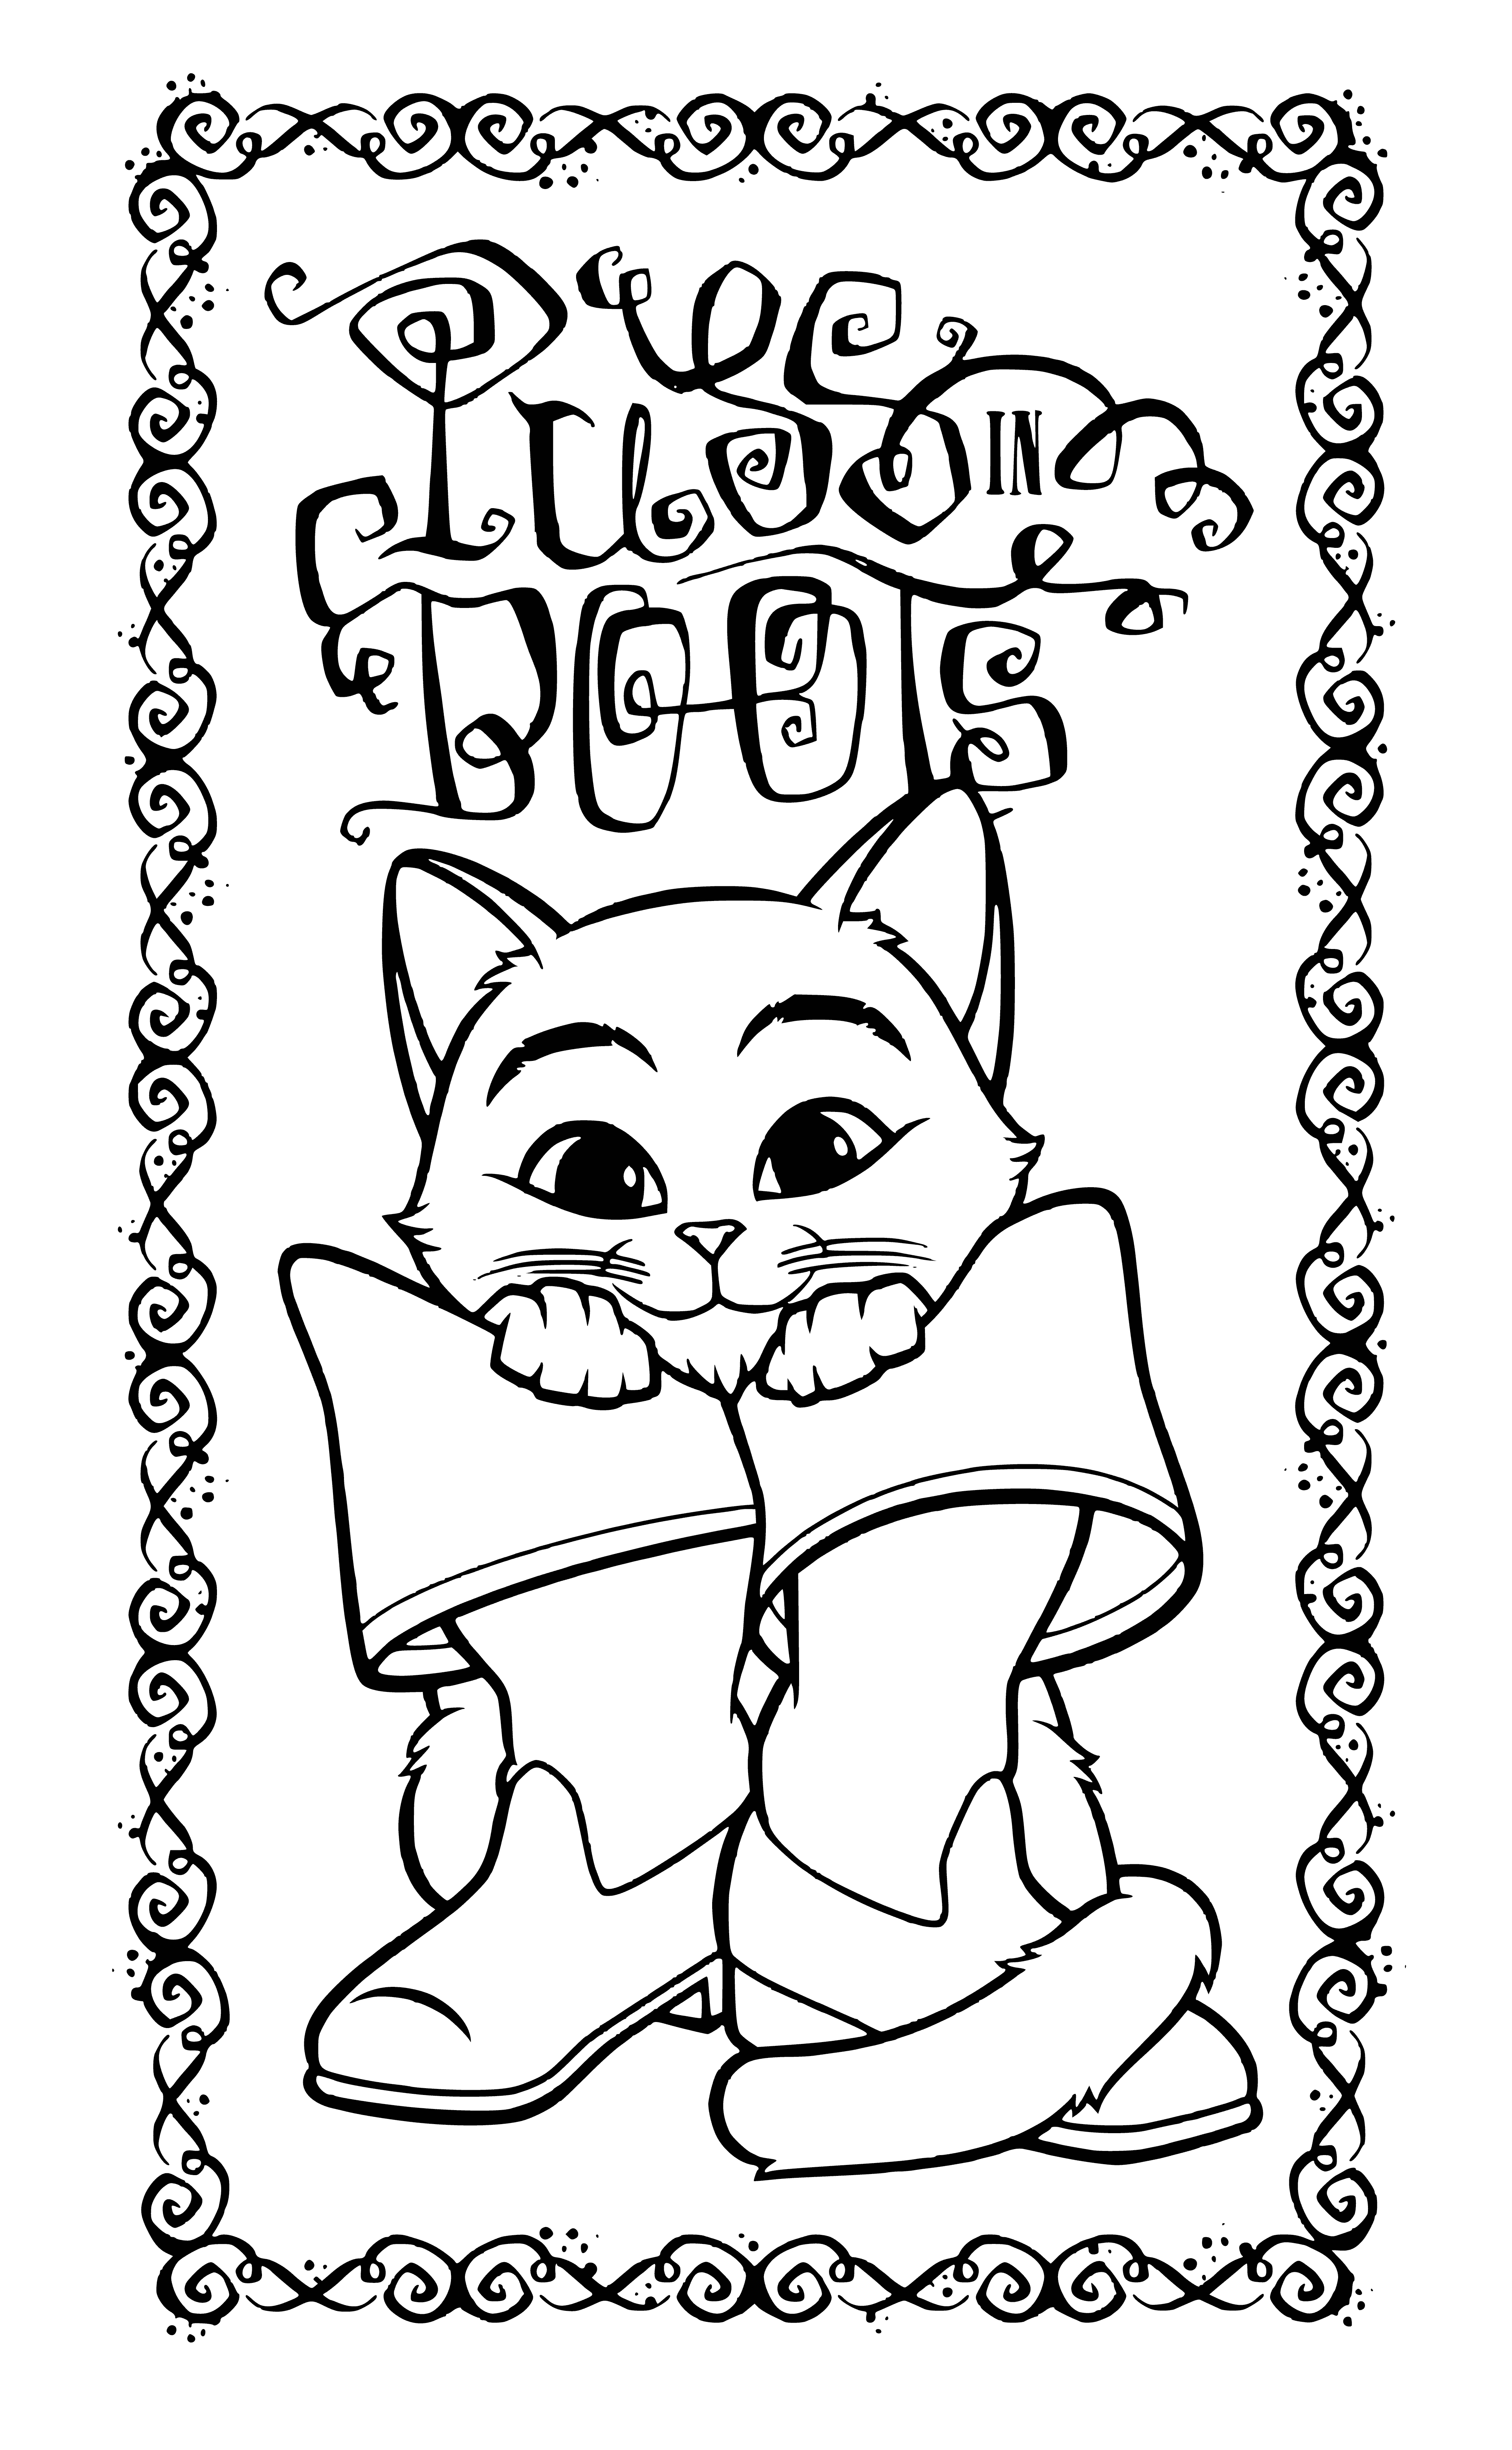 coloring page: A cartoon cat wearing a hat and boots stands on a path in a forest.